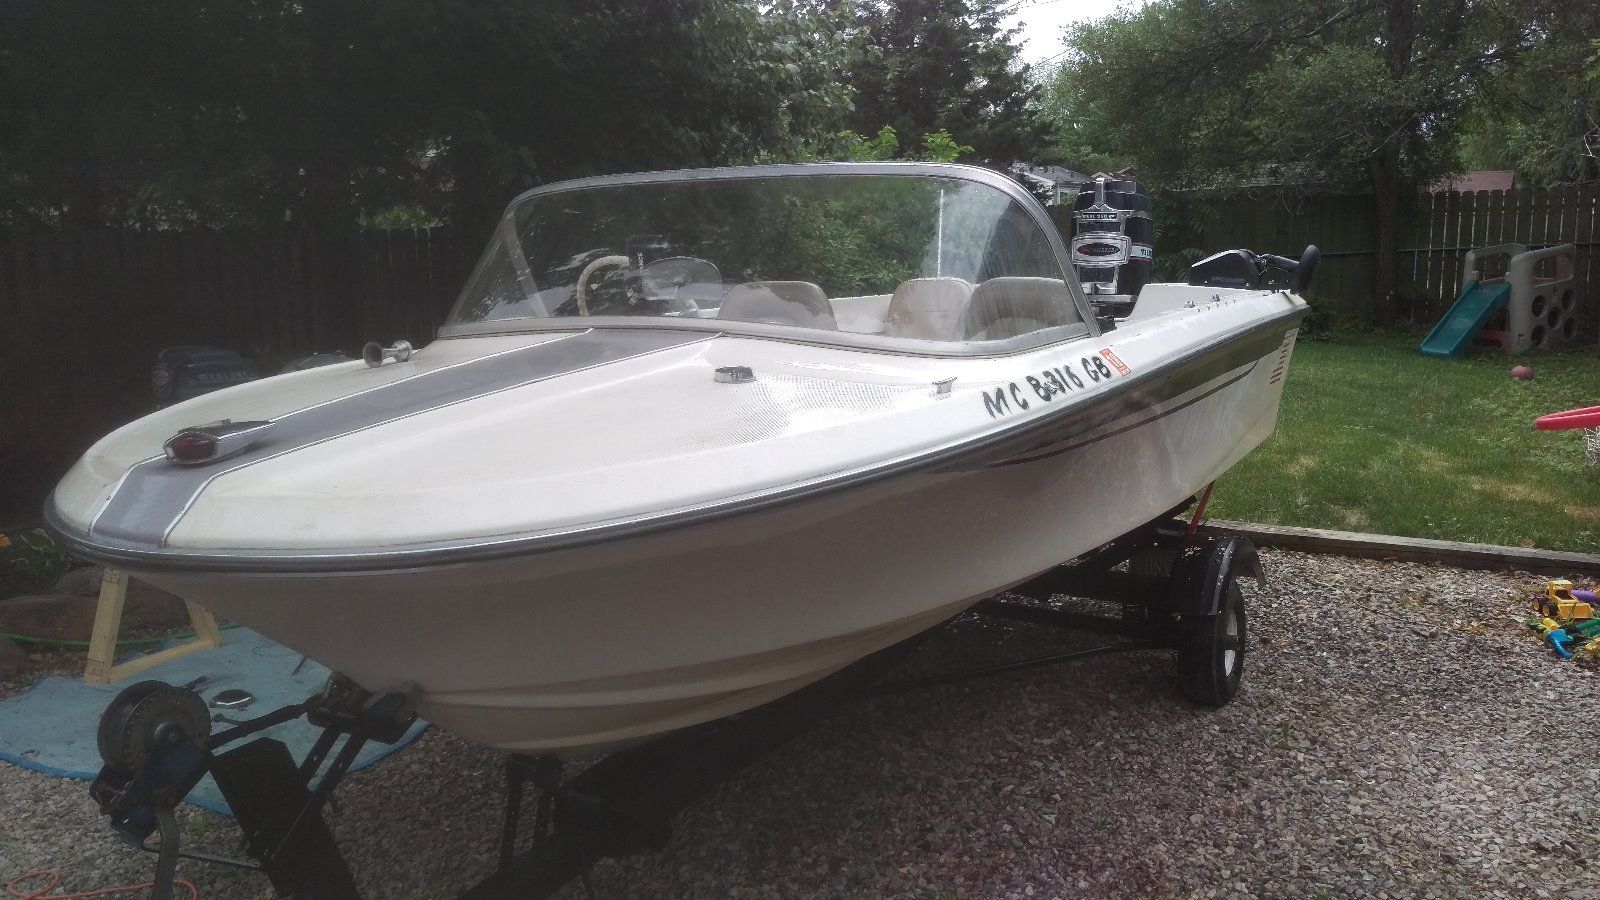 Mark Twain V-Sonic 1970 for sale for $2,000 - Boats-from-USA.com